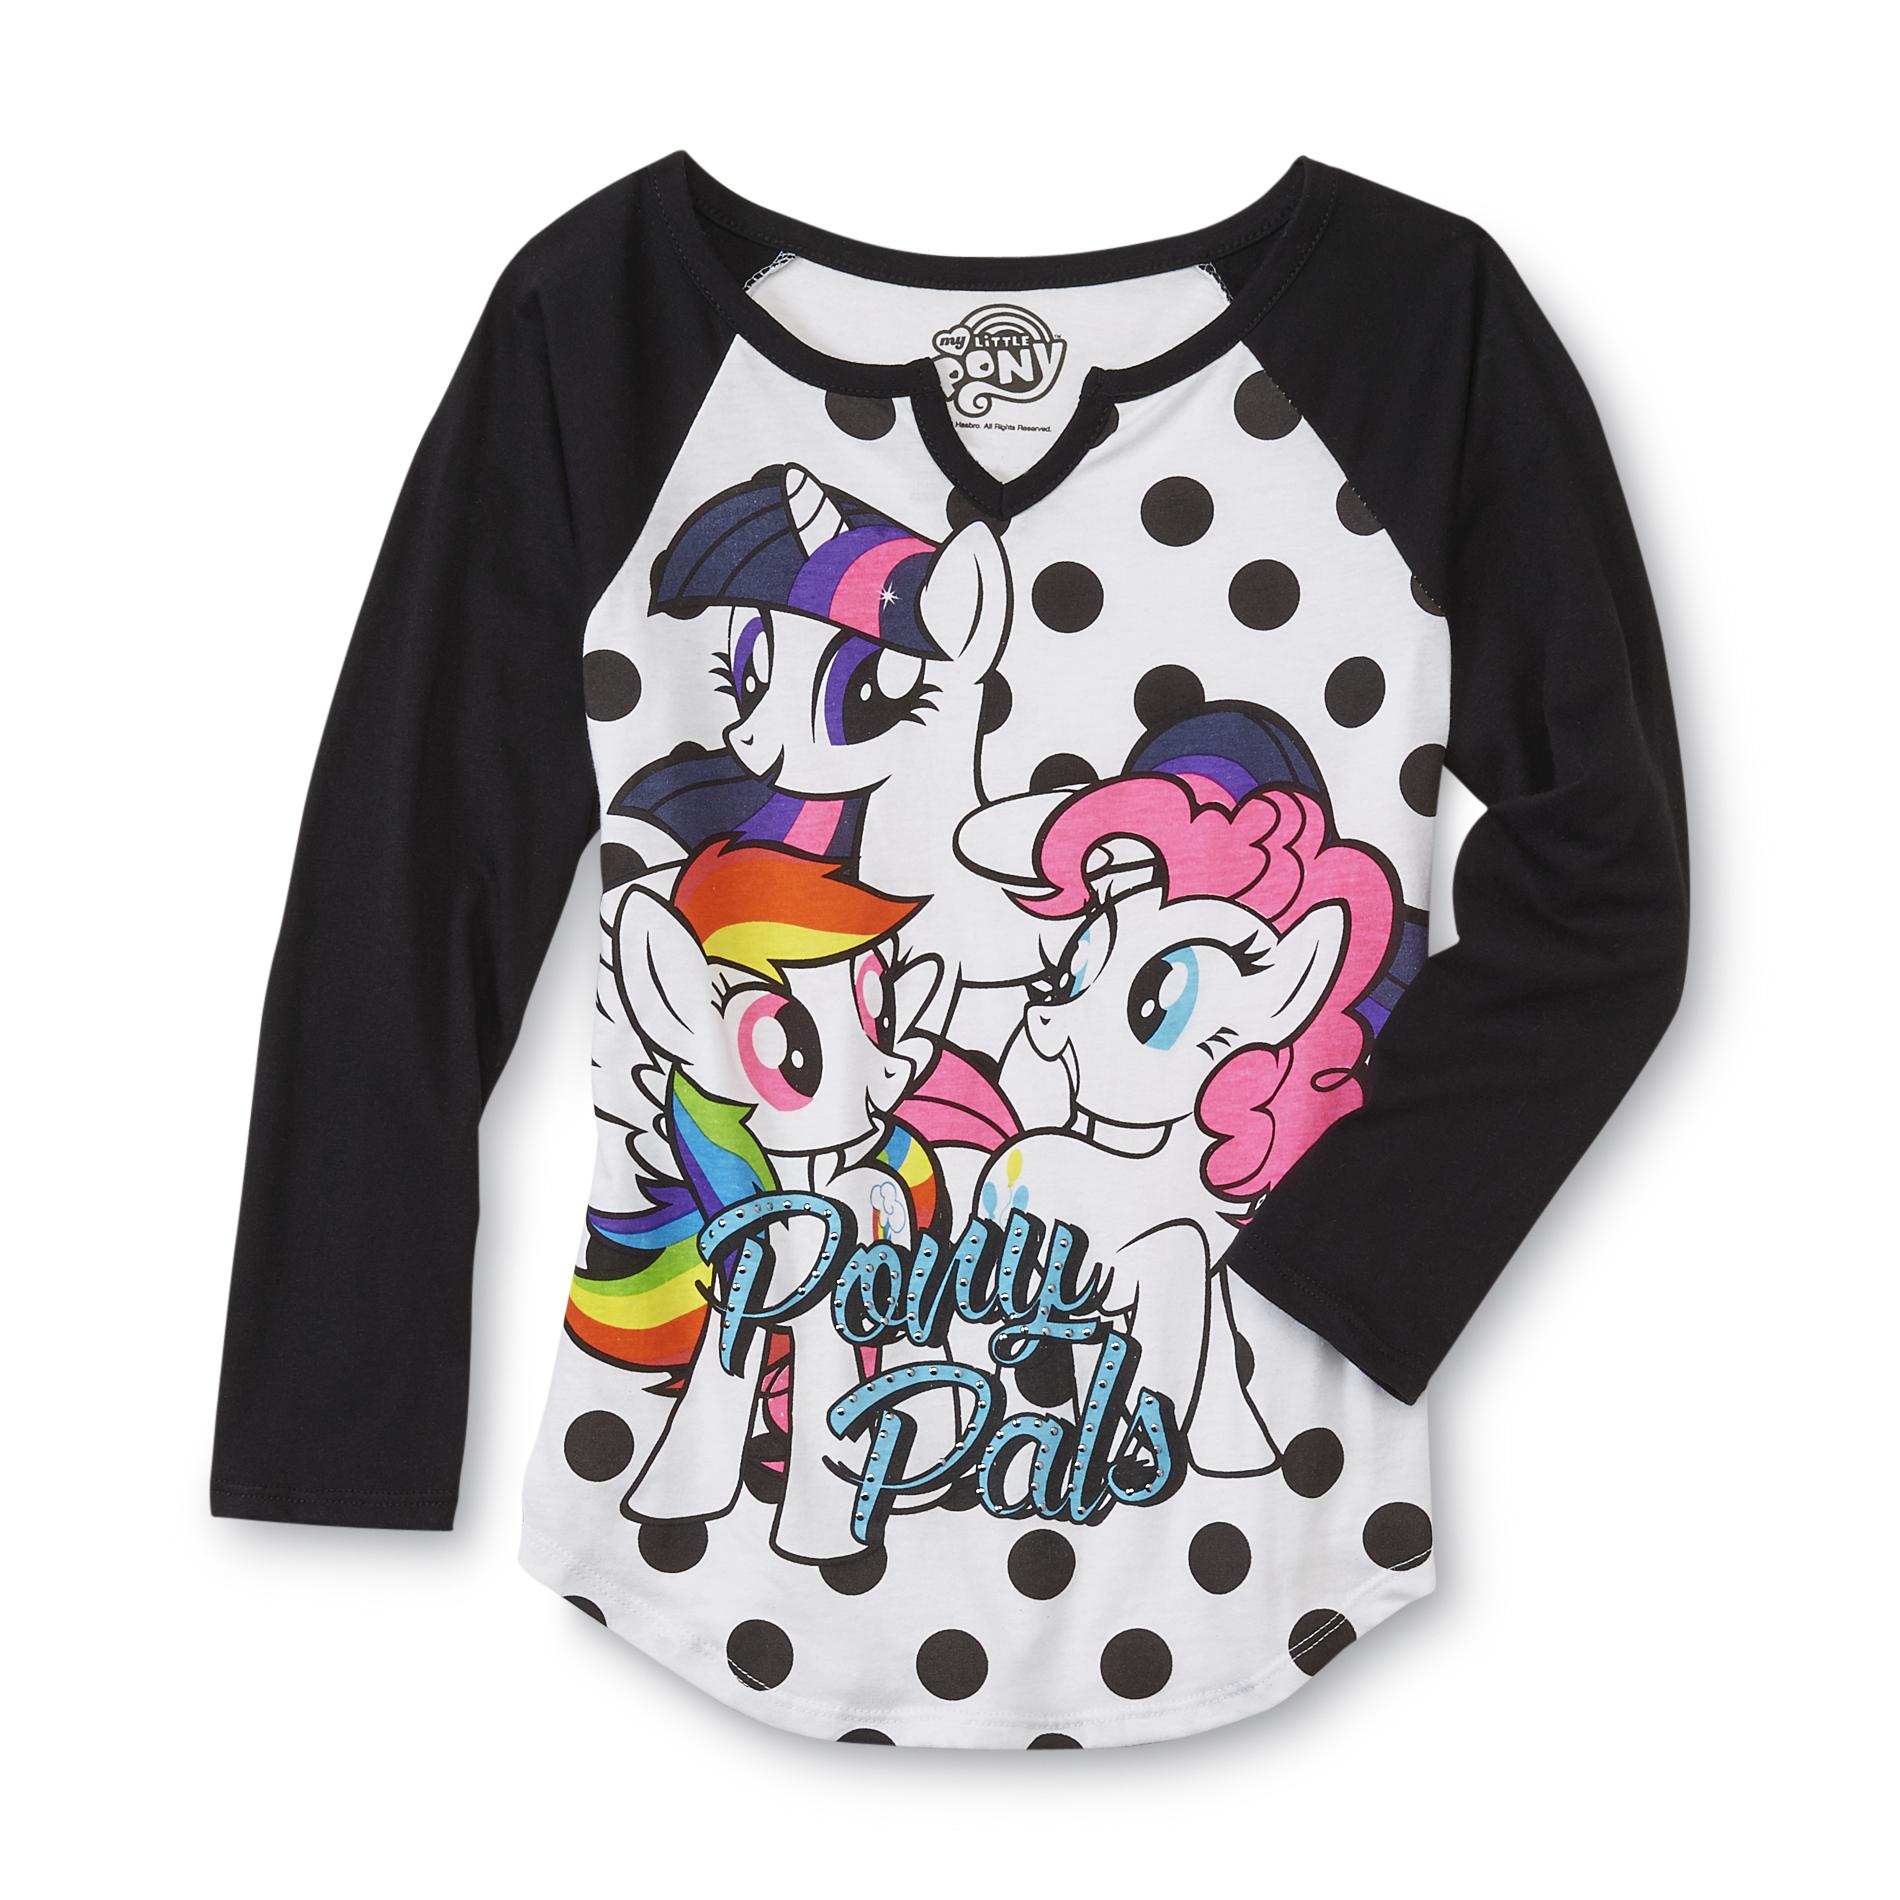 My Little Pony Girl's Long-Sleeve Graphic T-Shirt - Pony Pals